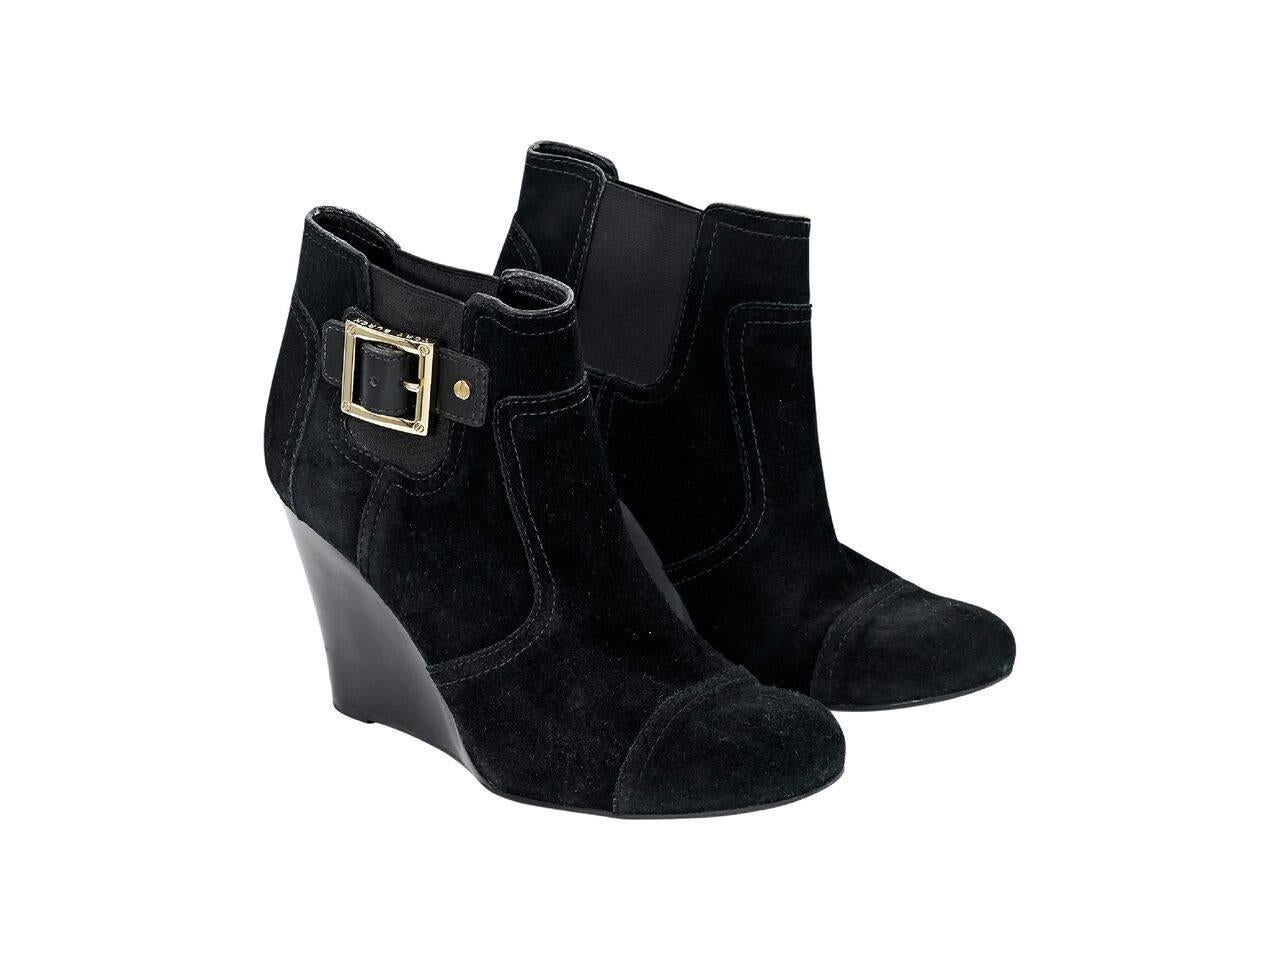 Product details:  Black suede wedge ankle boots by Tory Burch.  Elasticized side panels for an easy fit.  Round cap toe.  Slip-on style.  Goldtone hardware.
Condition: Pre-owned. Very good.
Est. Retail $ 498.00